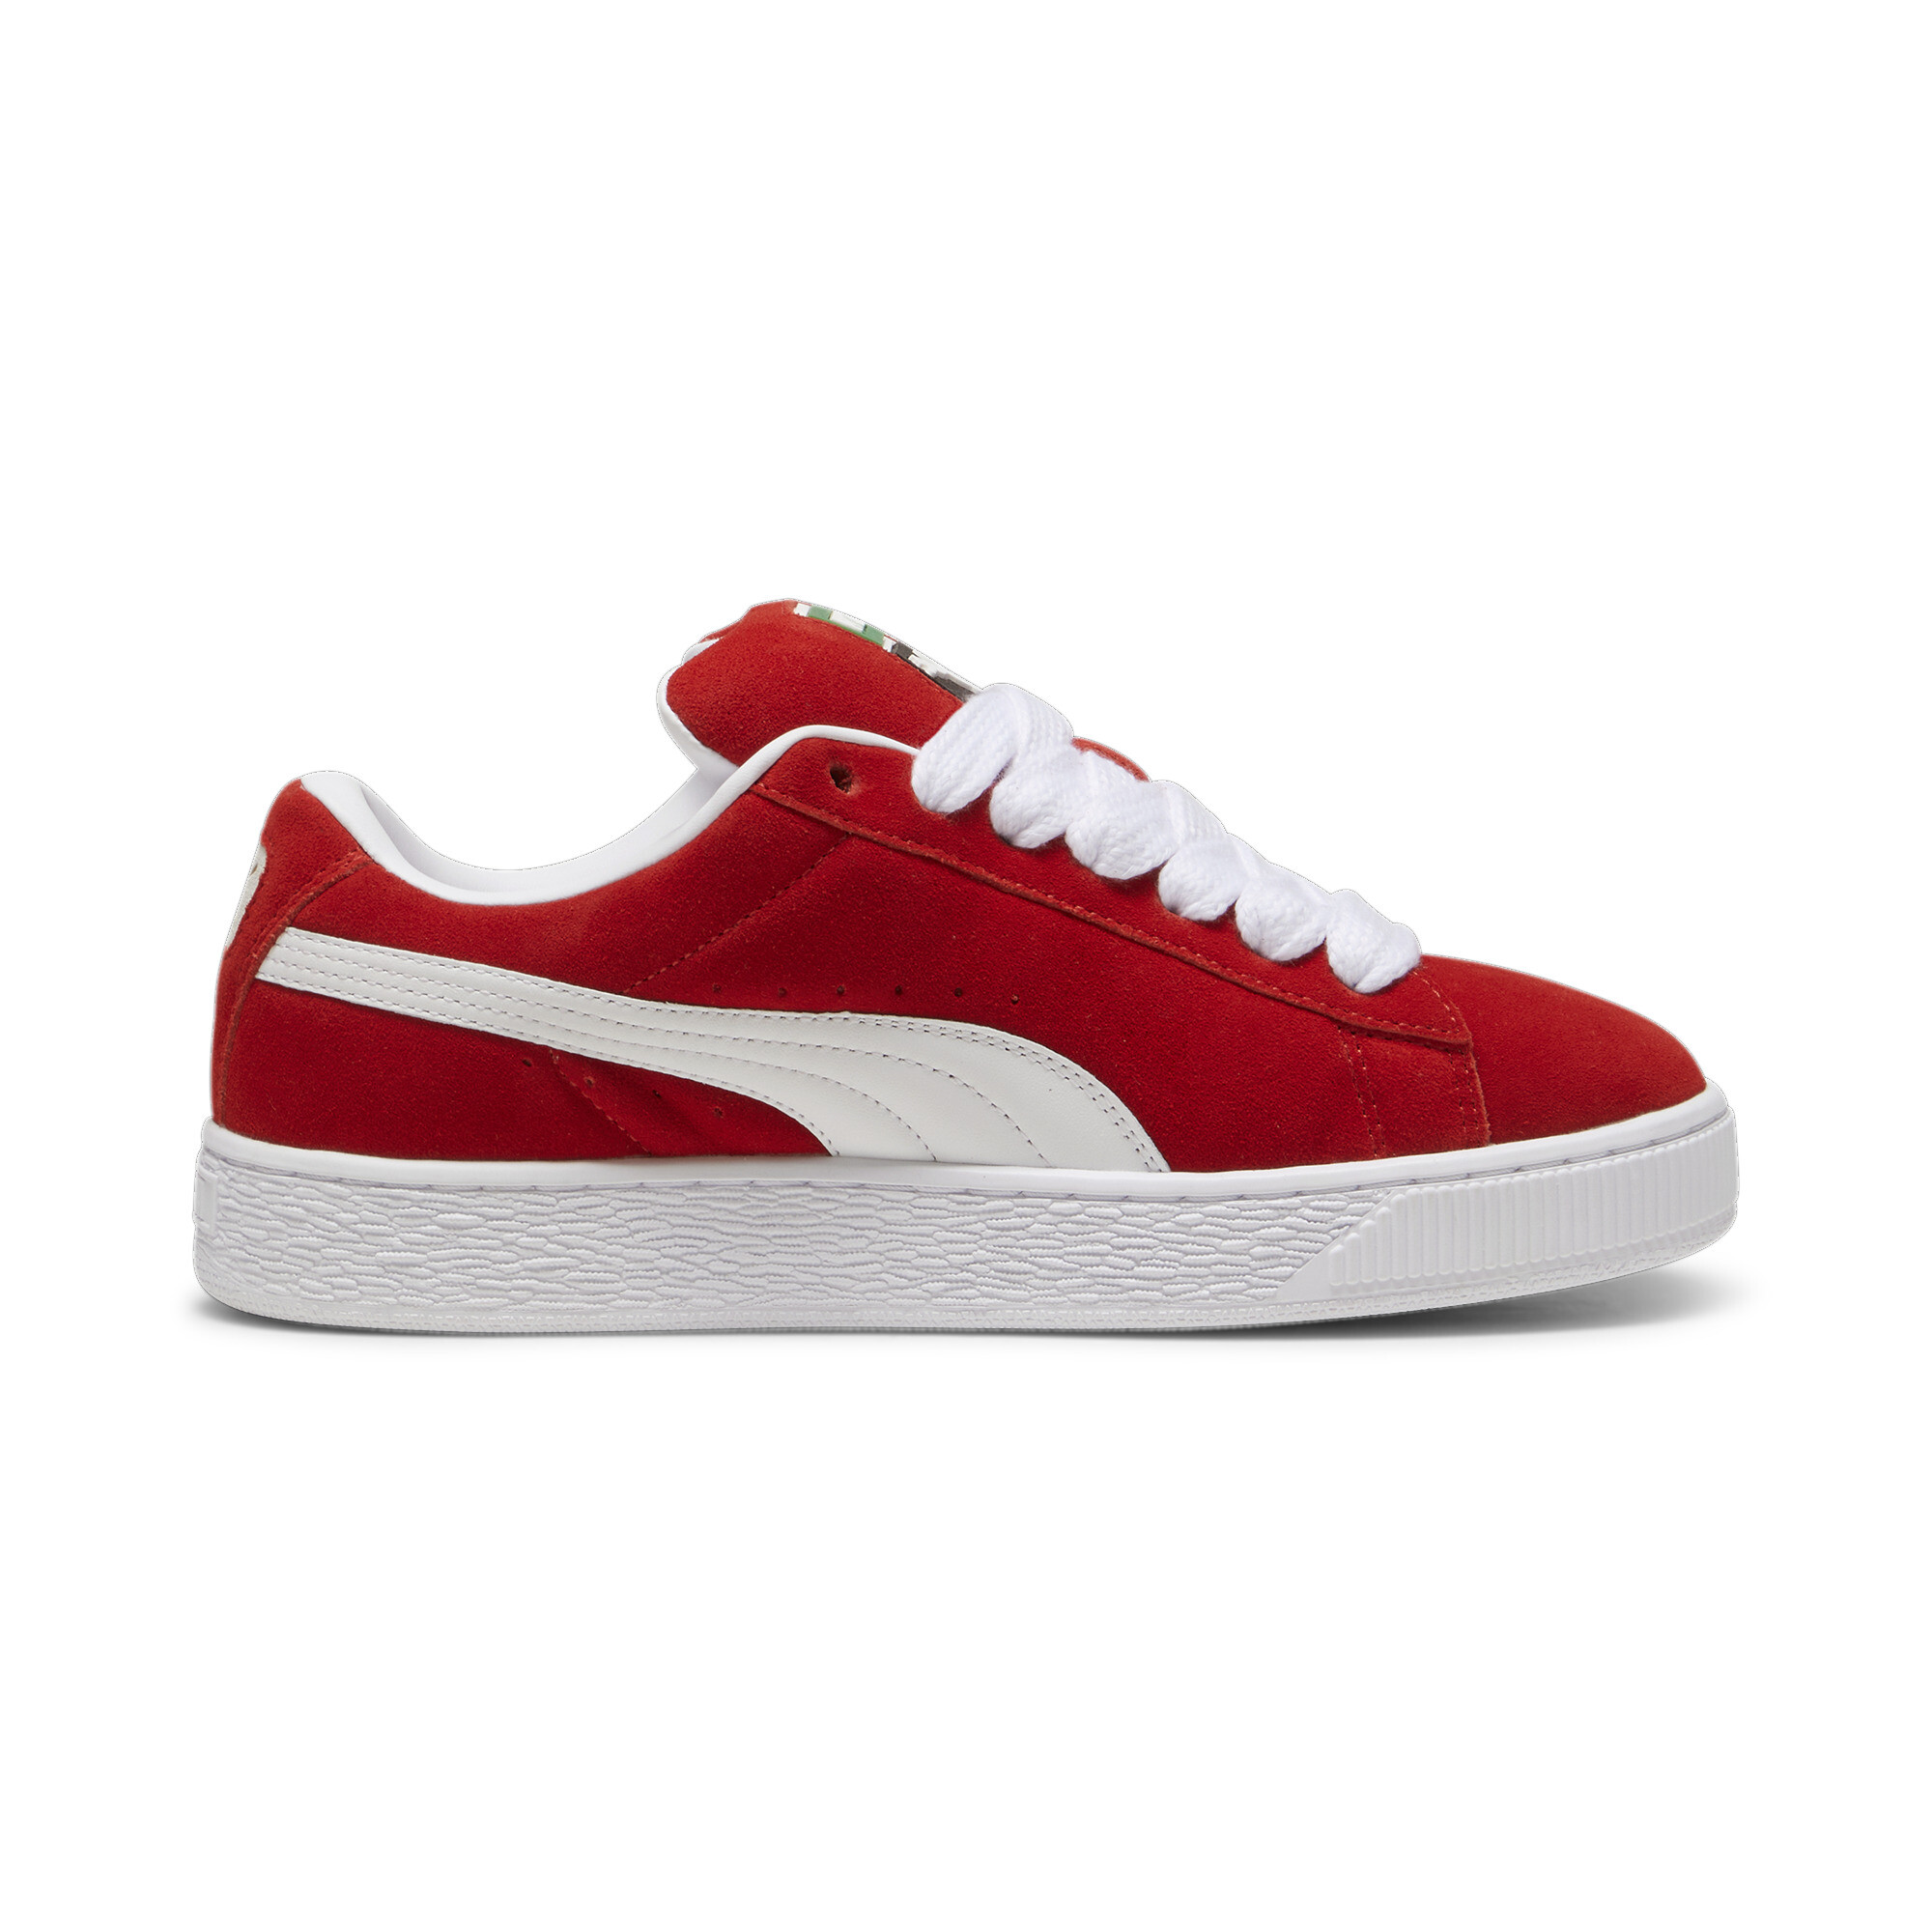 Puma Suede XL Sneakers Unisex, Red, Size 37, Shoes